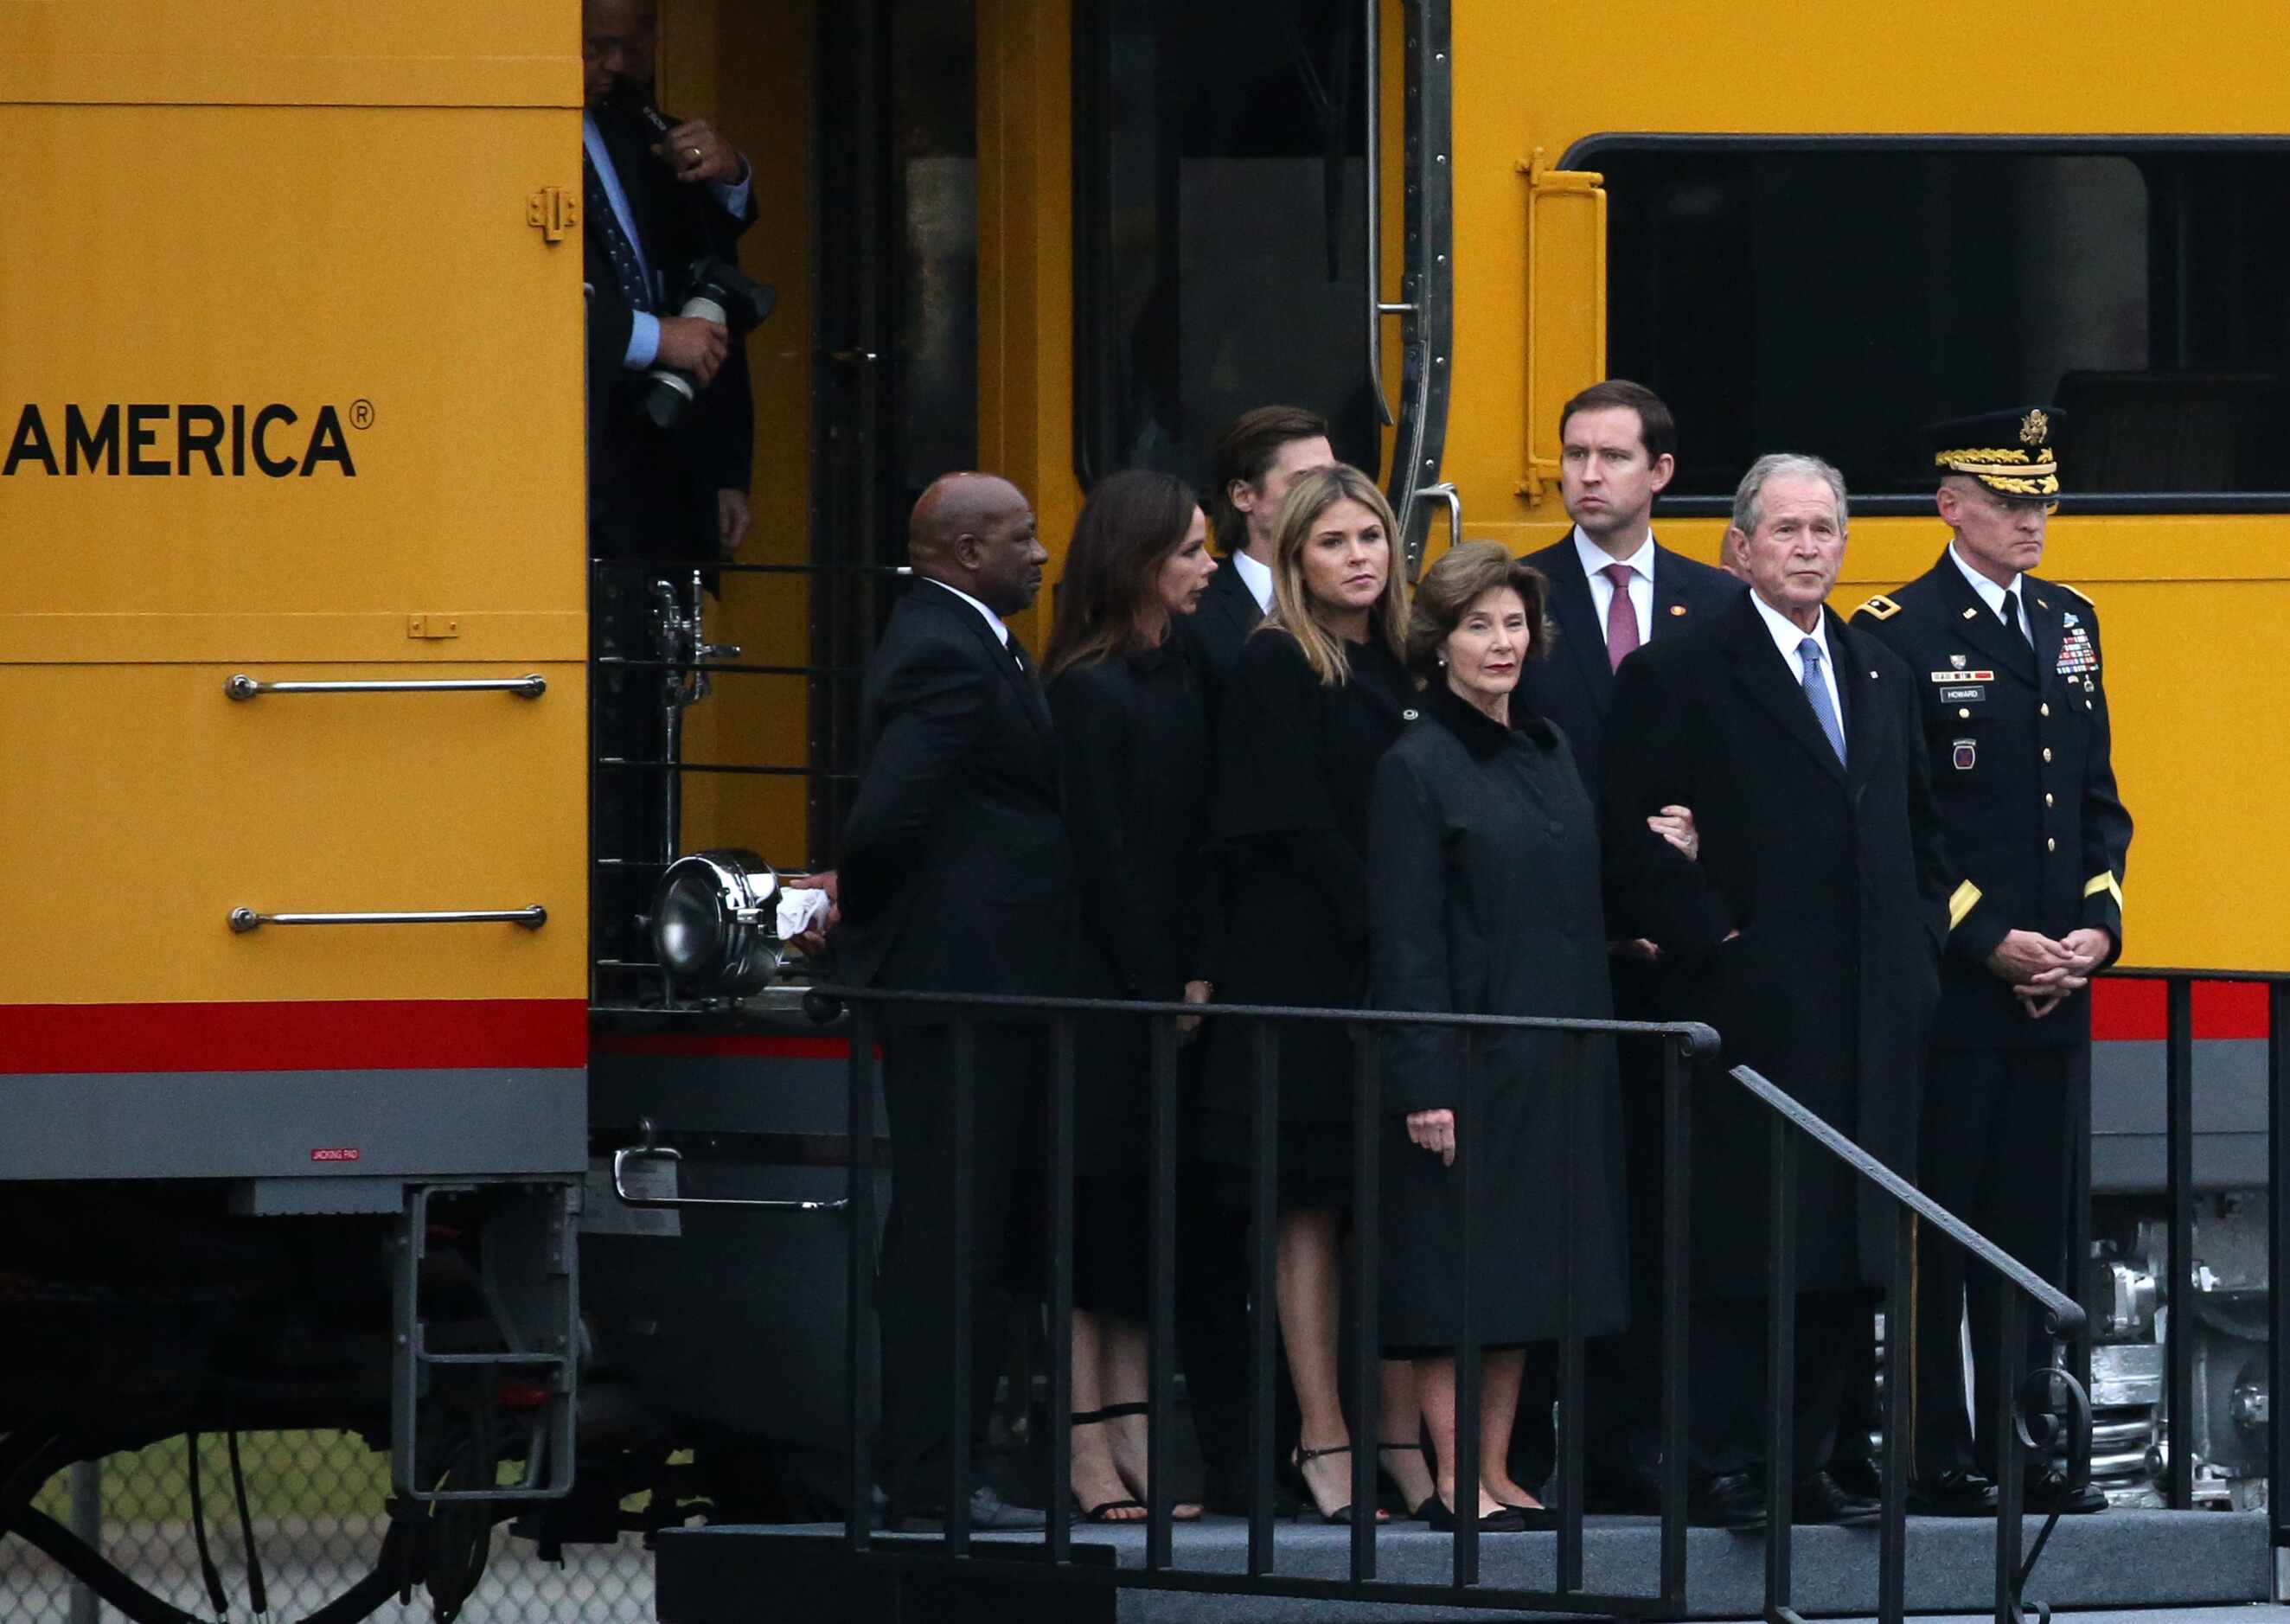 Former President George W. Bush and Laura Bush and their daughters are among family exiting...